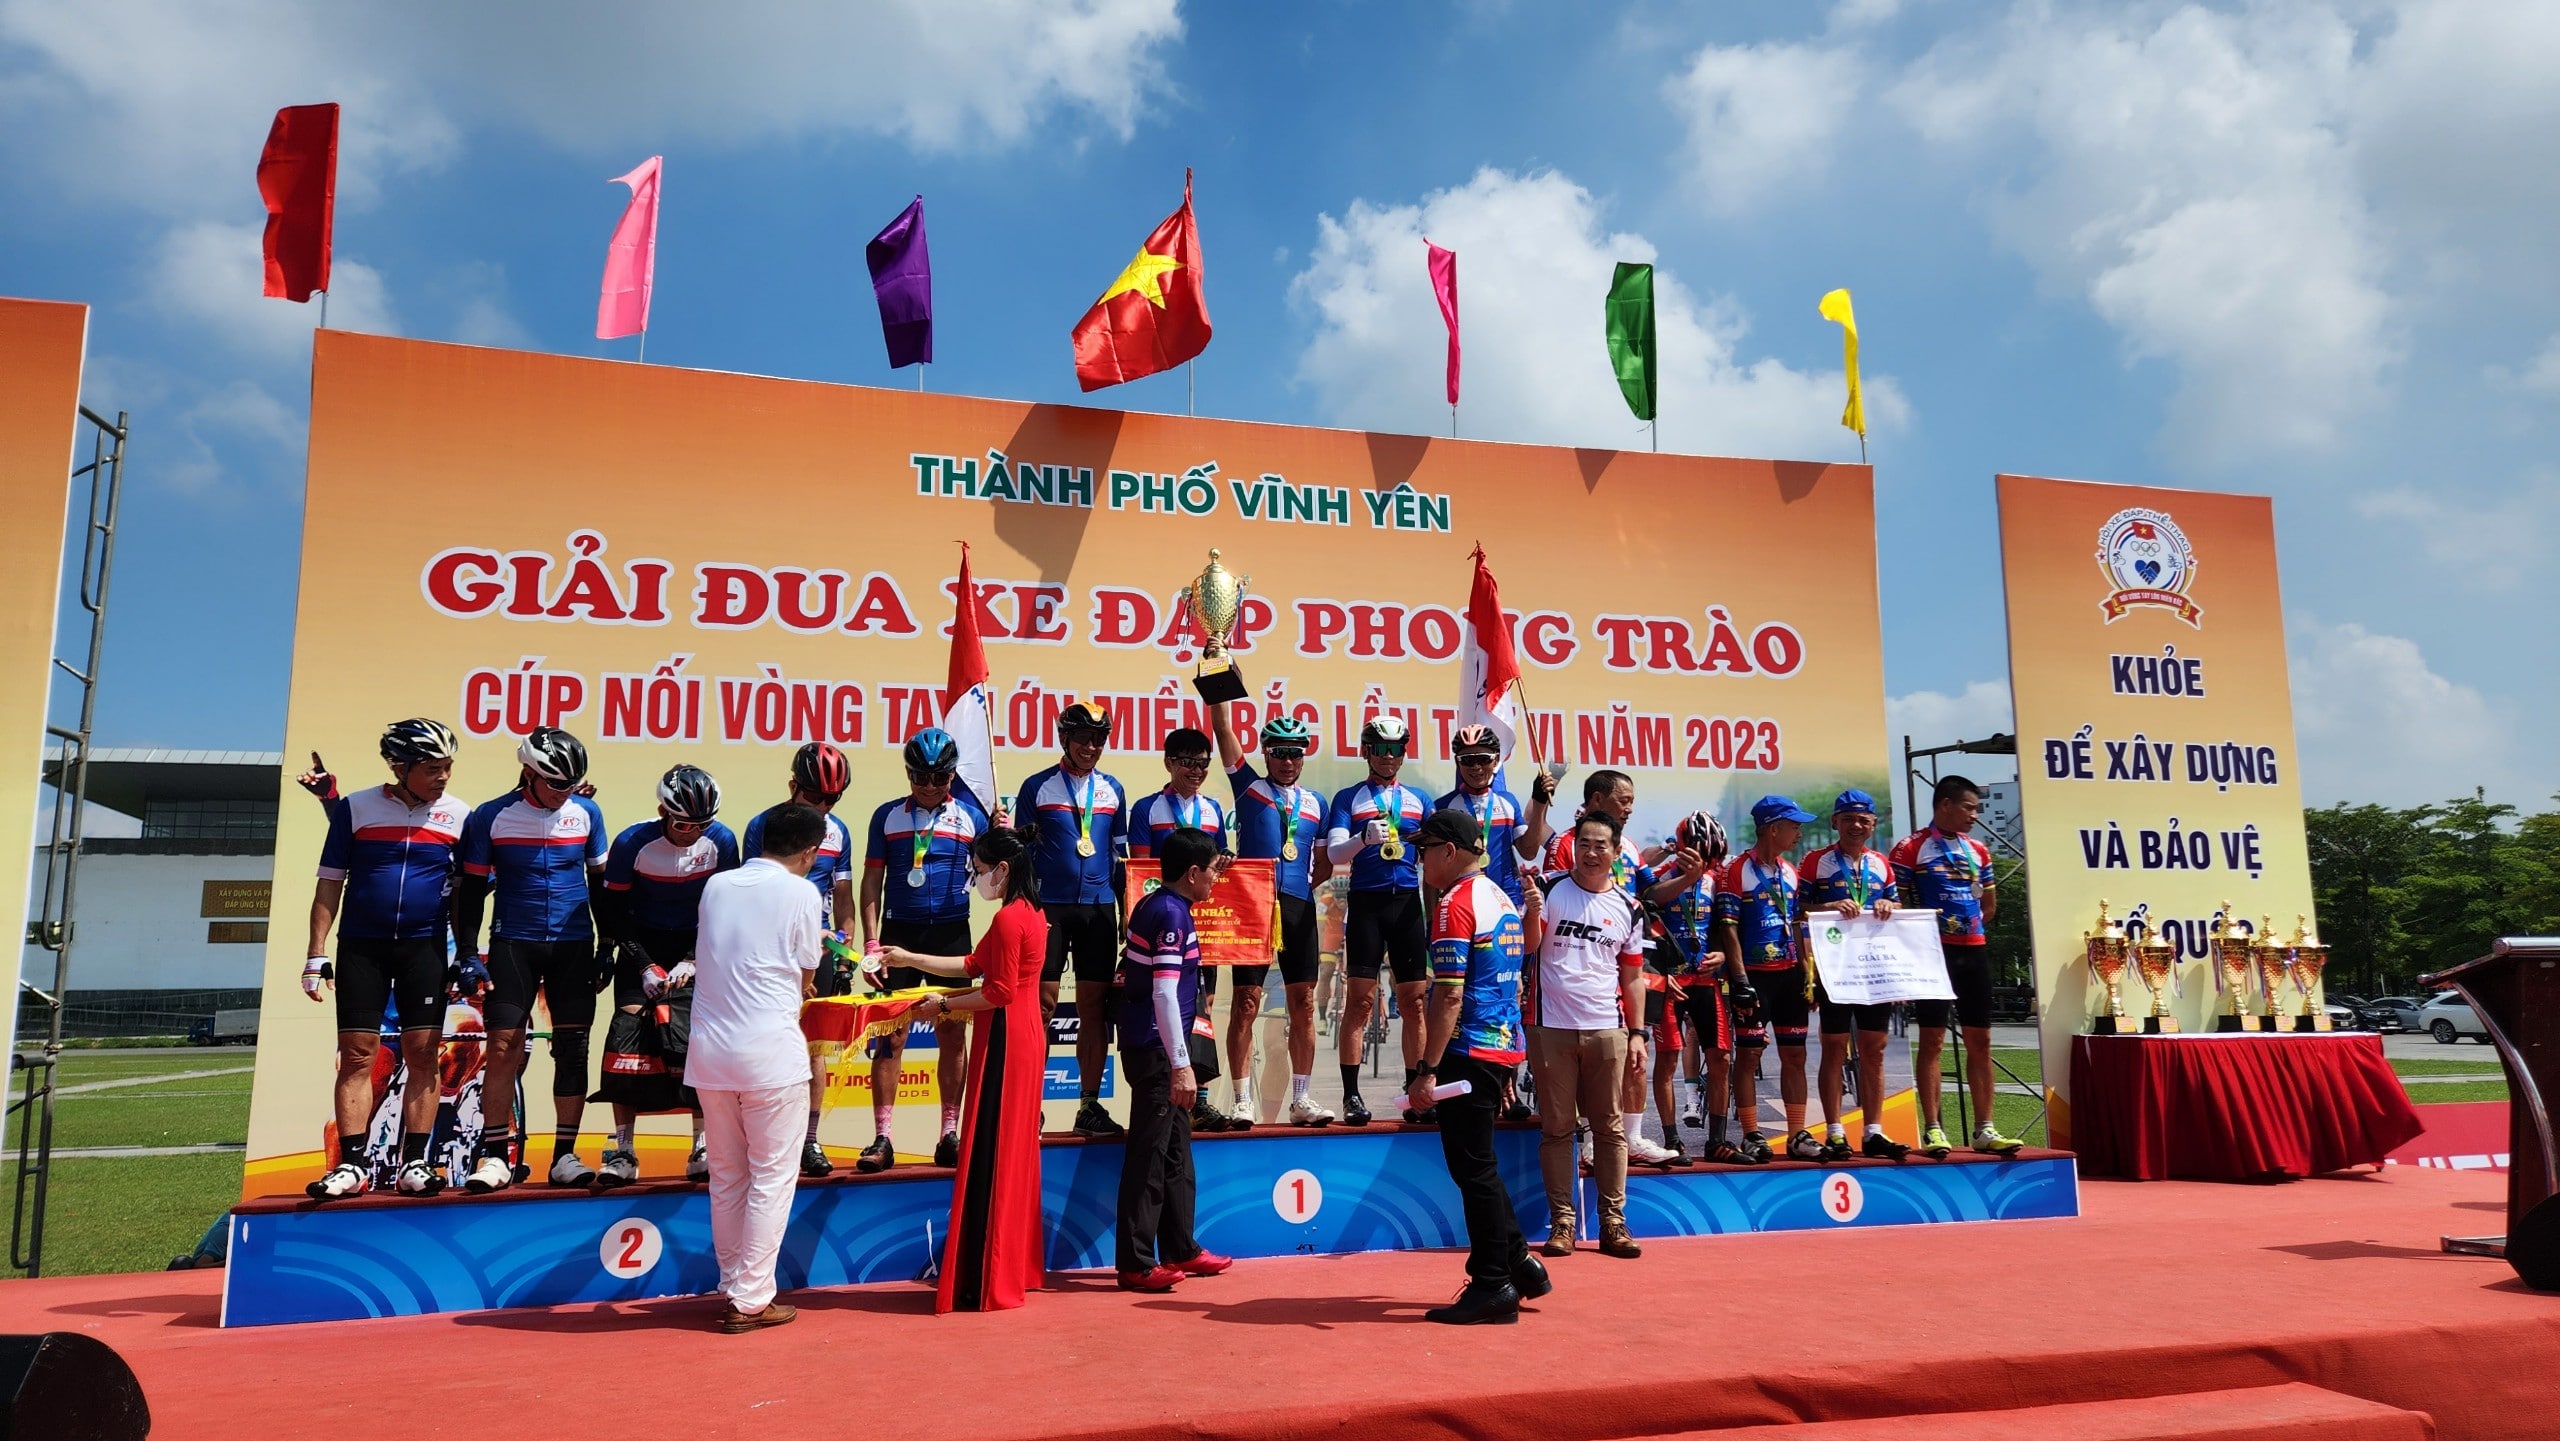 IRC TIRE VIETNAM - SPONSOR OF THE 6TH NORTHERN AMATEUR BICYCLE RACE